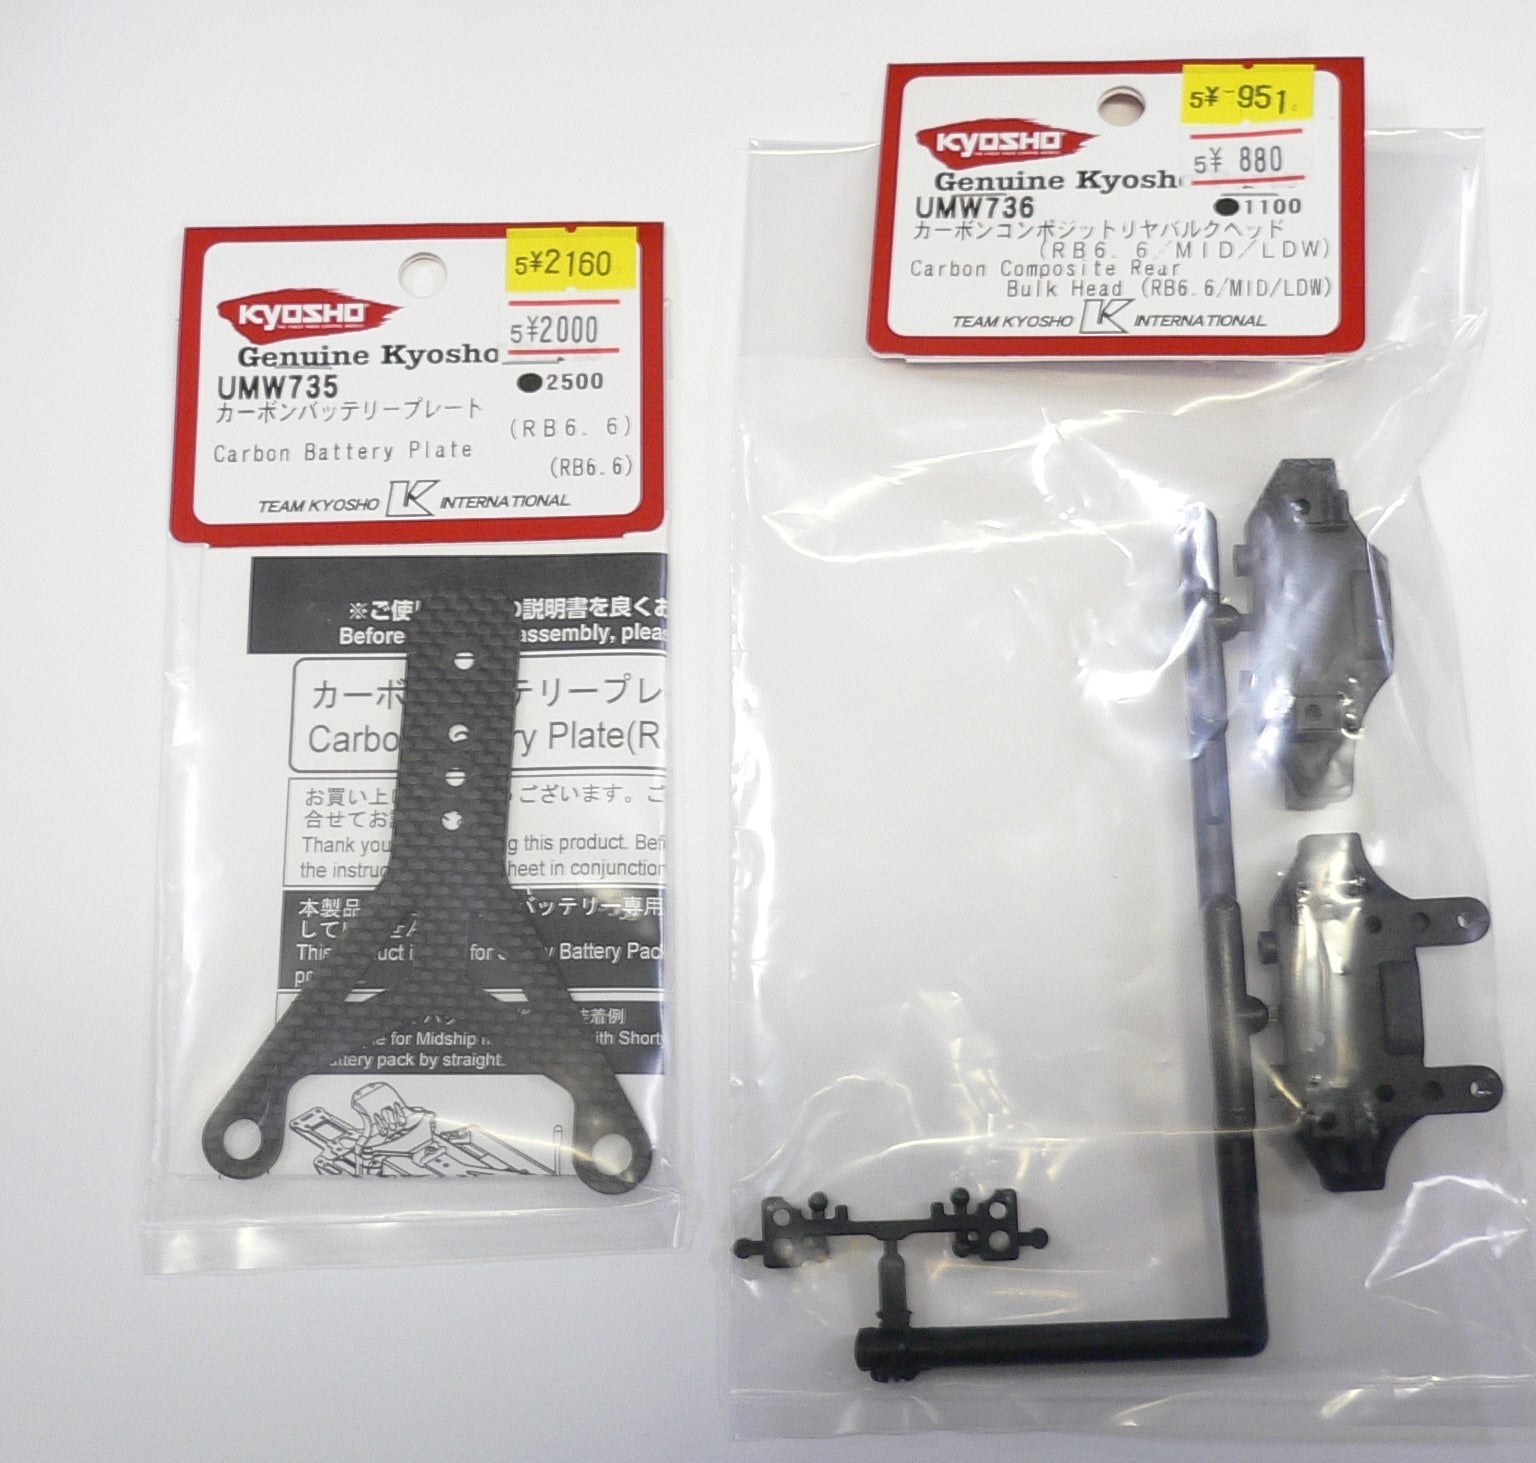 Kyosho RB6.6 Carbon Battery Plate UMW735